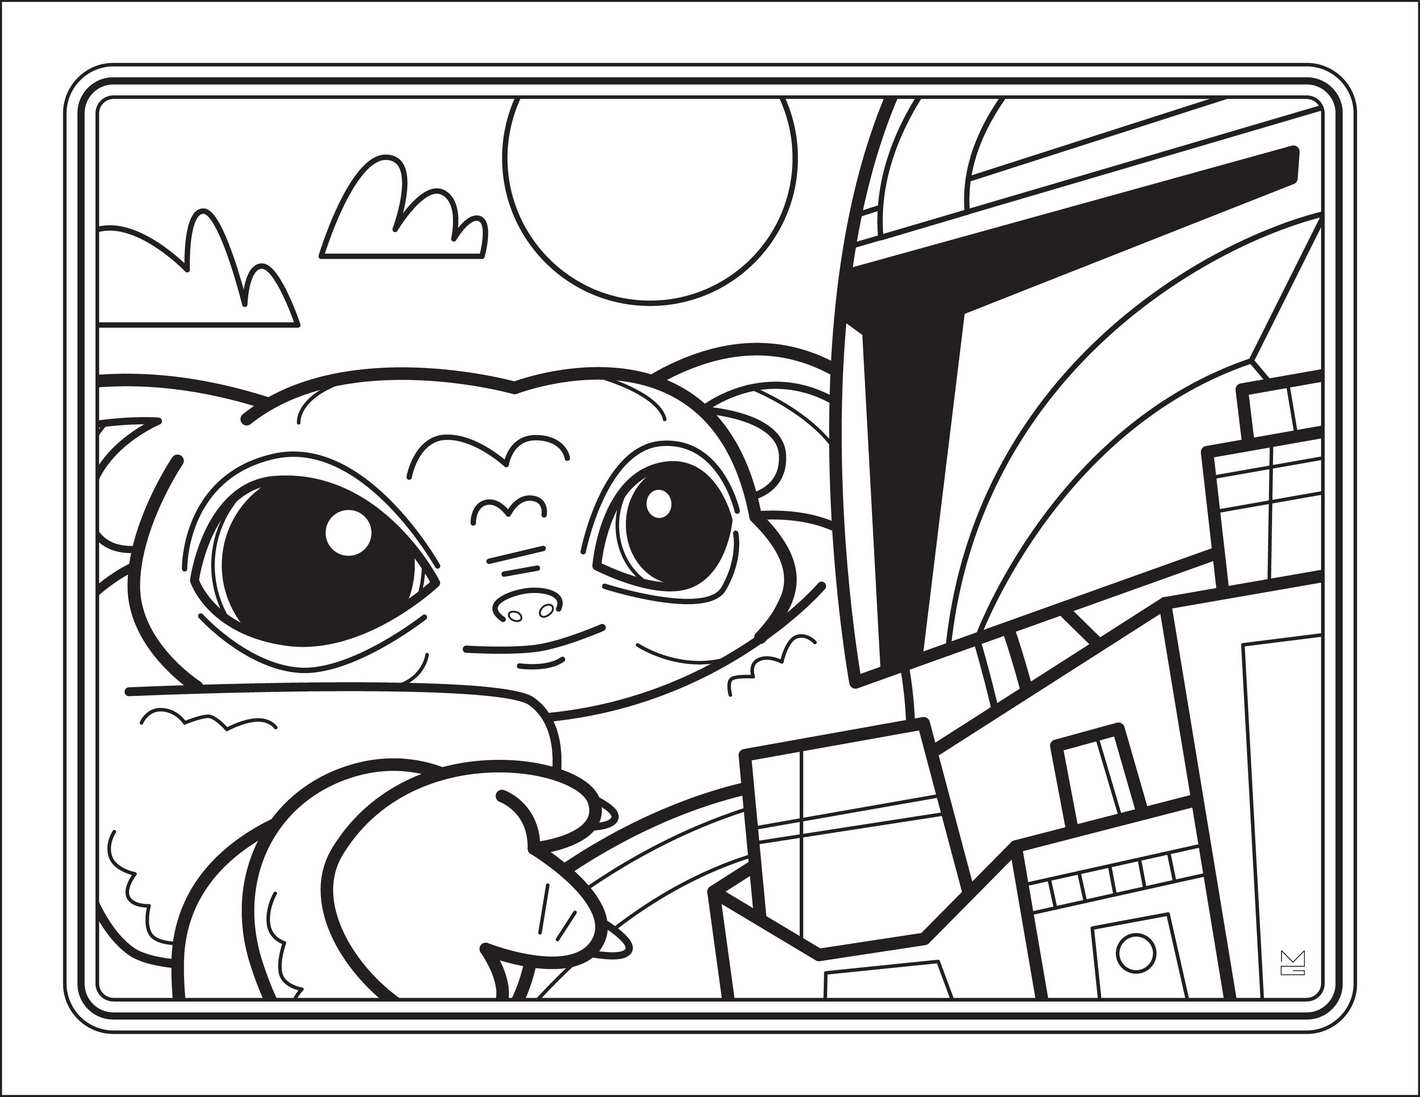 You can get a free downloadable baby yoda coloring book chip and pany